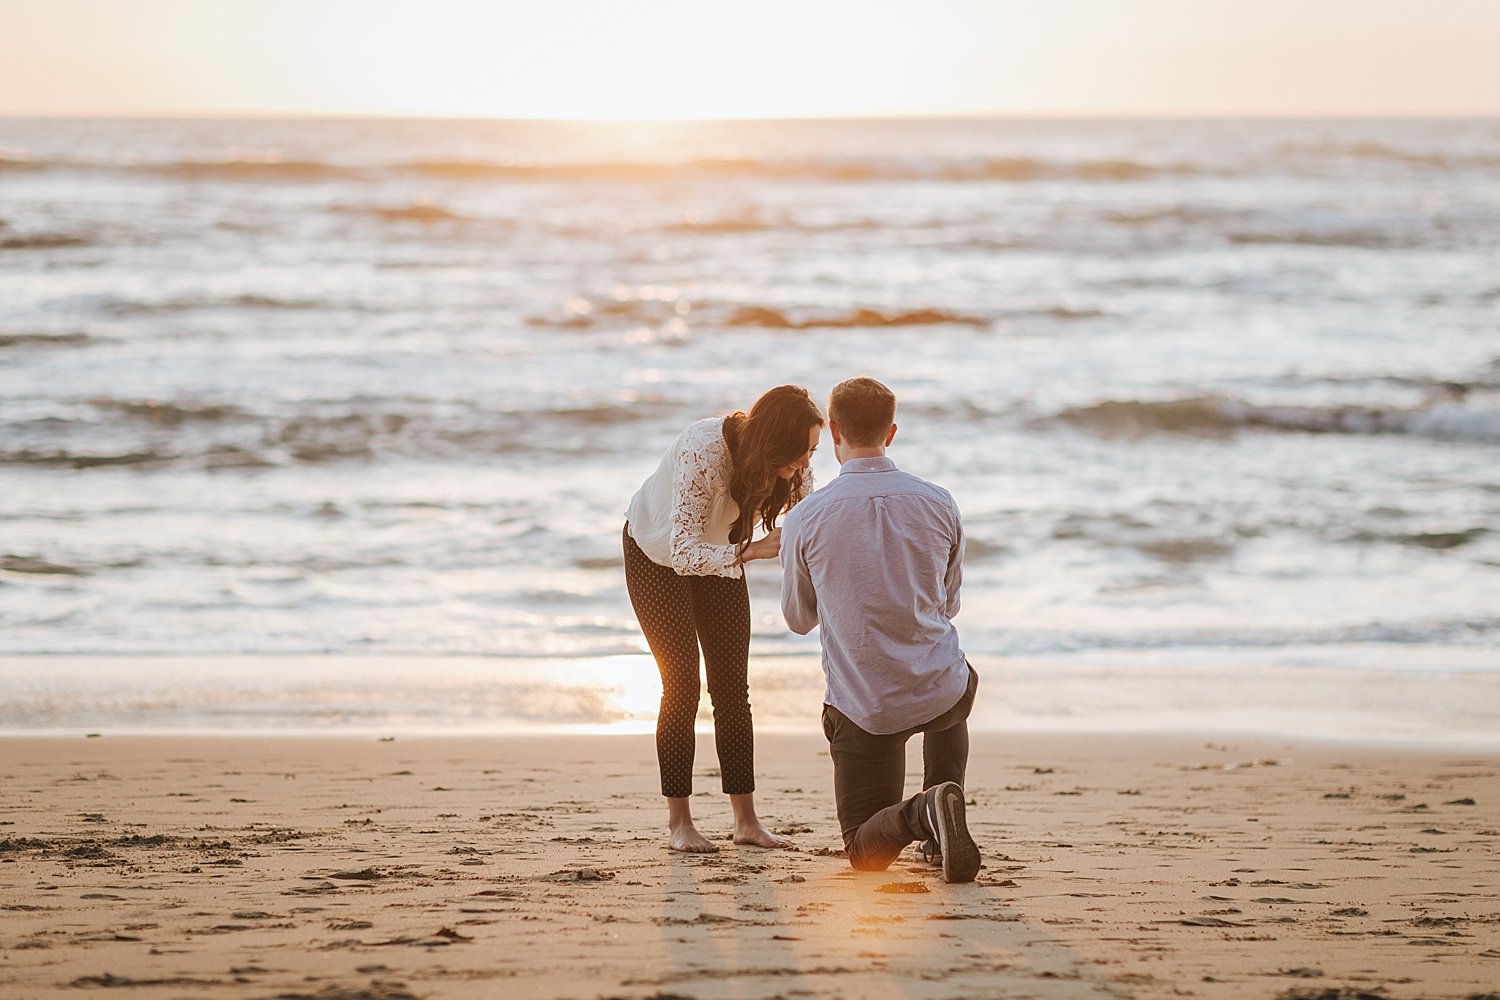 Sunset at Ritz Carlton Half Moon Bay is a perfect time to propose to your sweetheart. This beachy proposal and engagement shoot is so adorable and cute.